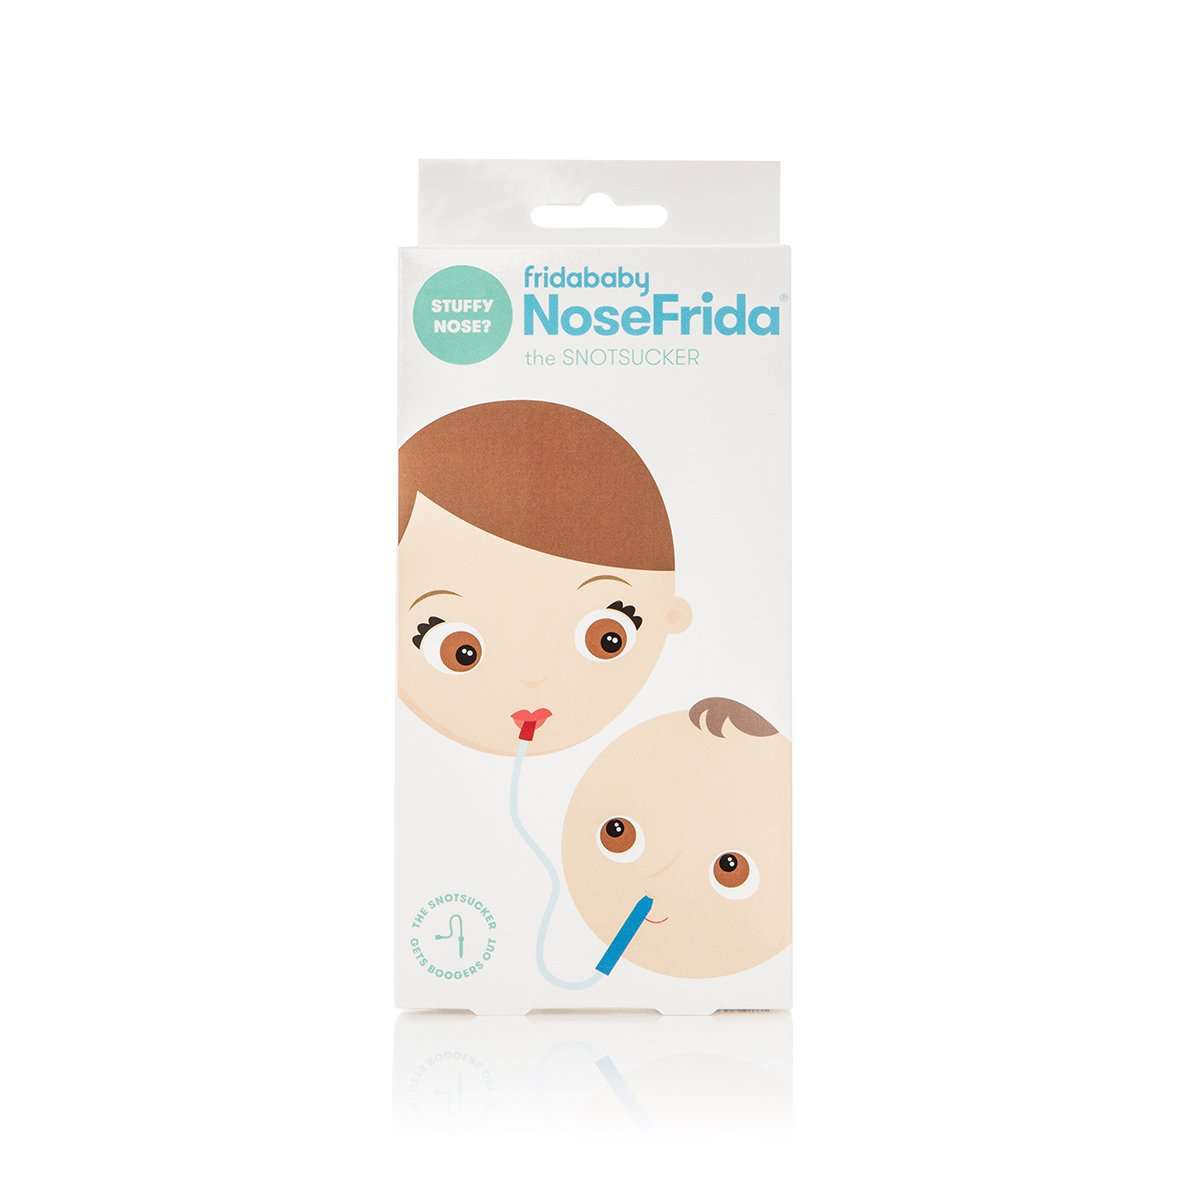 5 Ways to Make Sure You Are Using Your NoseFrida Correctly